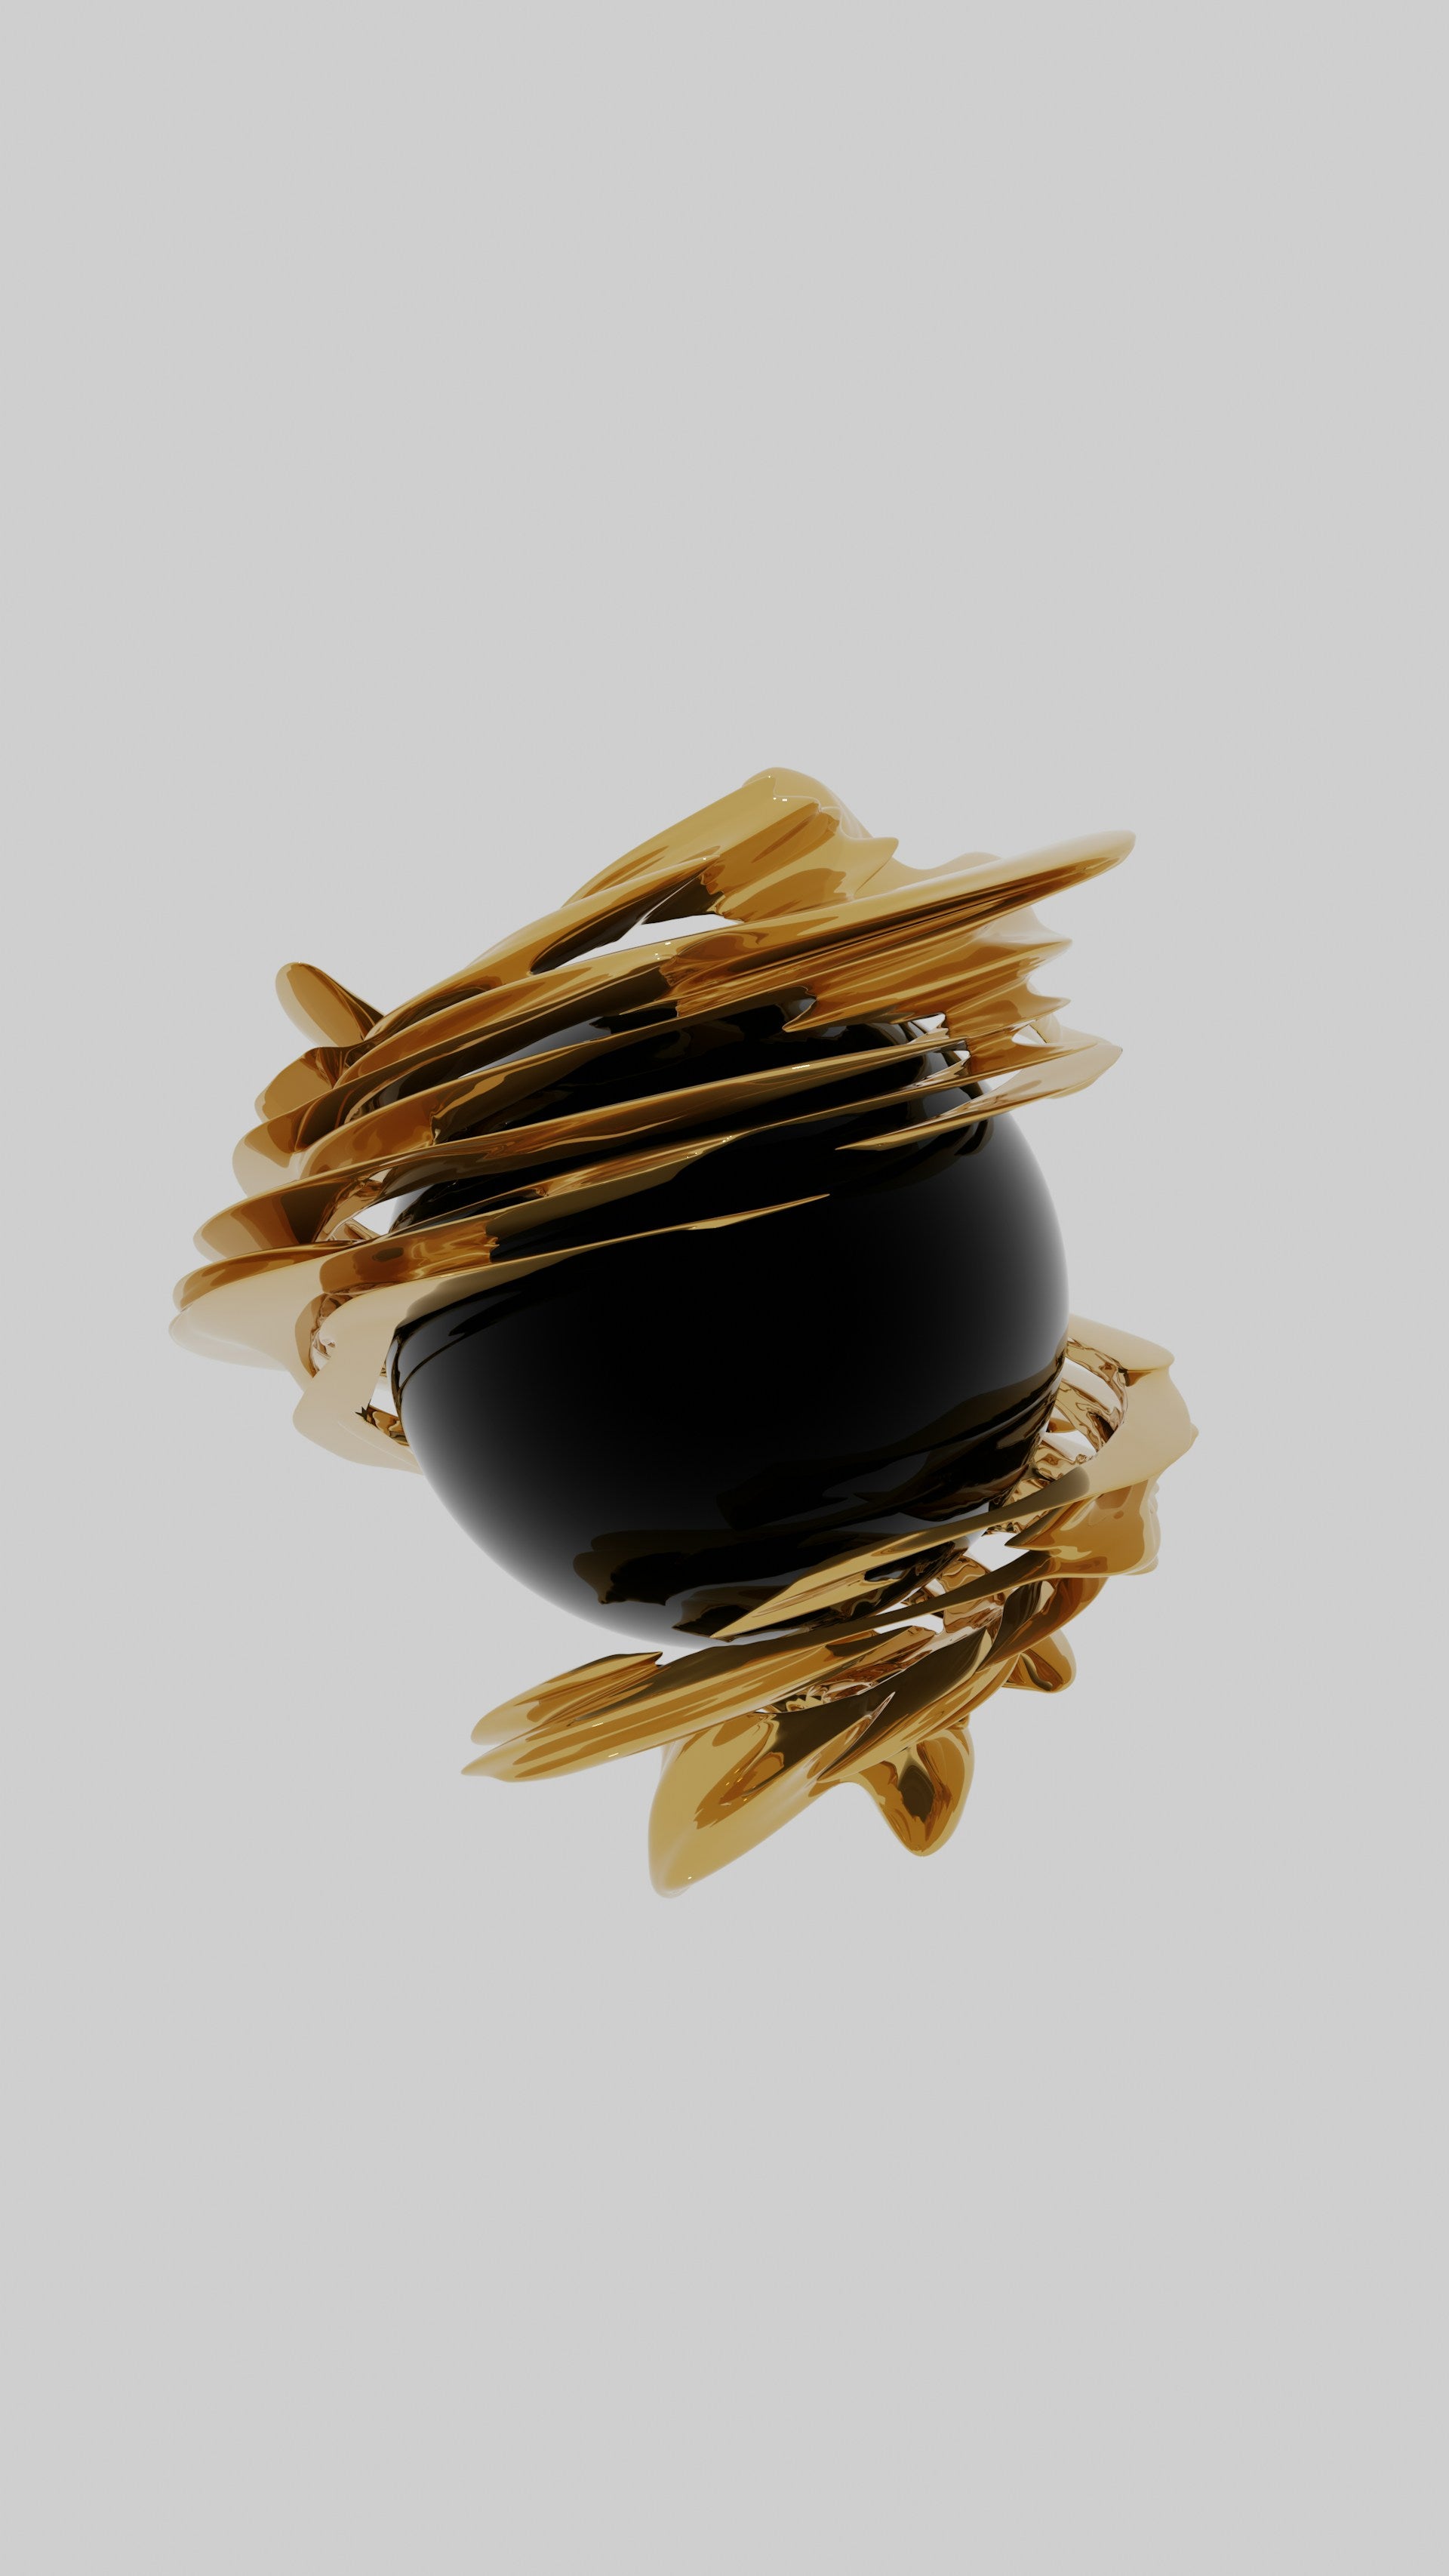 A round black and gold object in front of a white background.